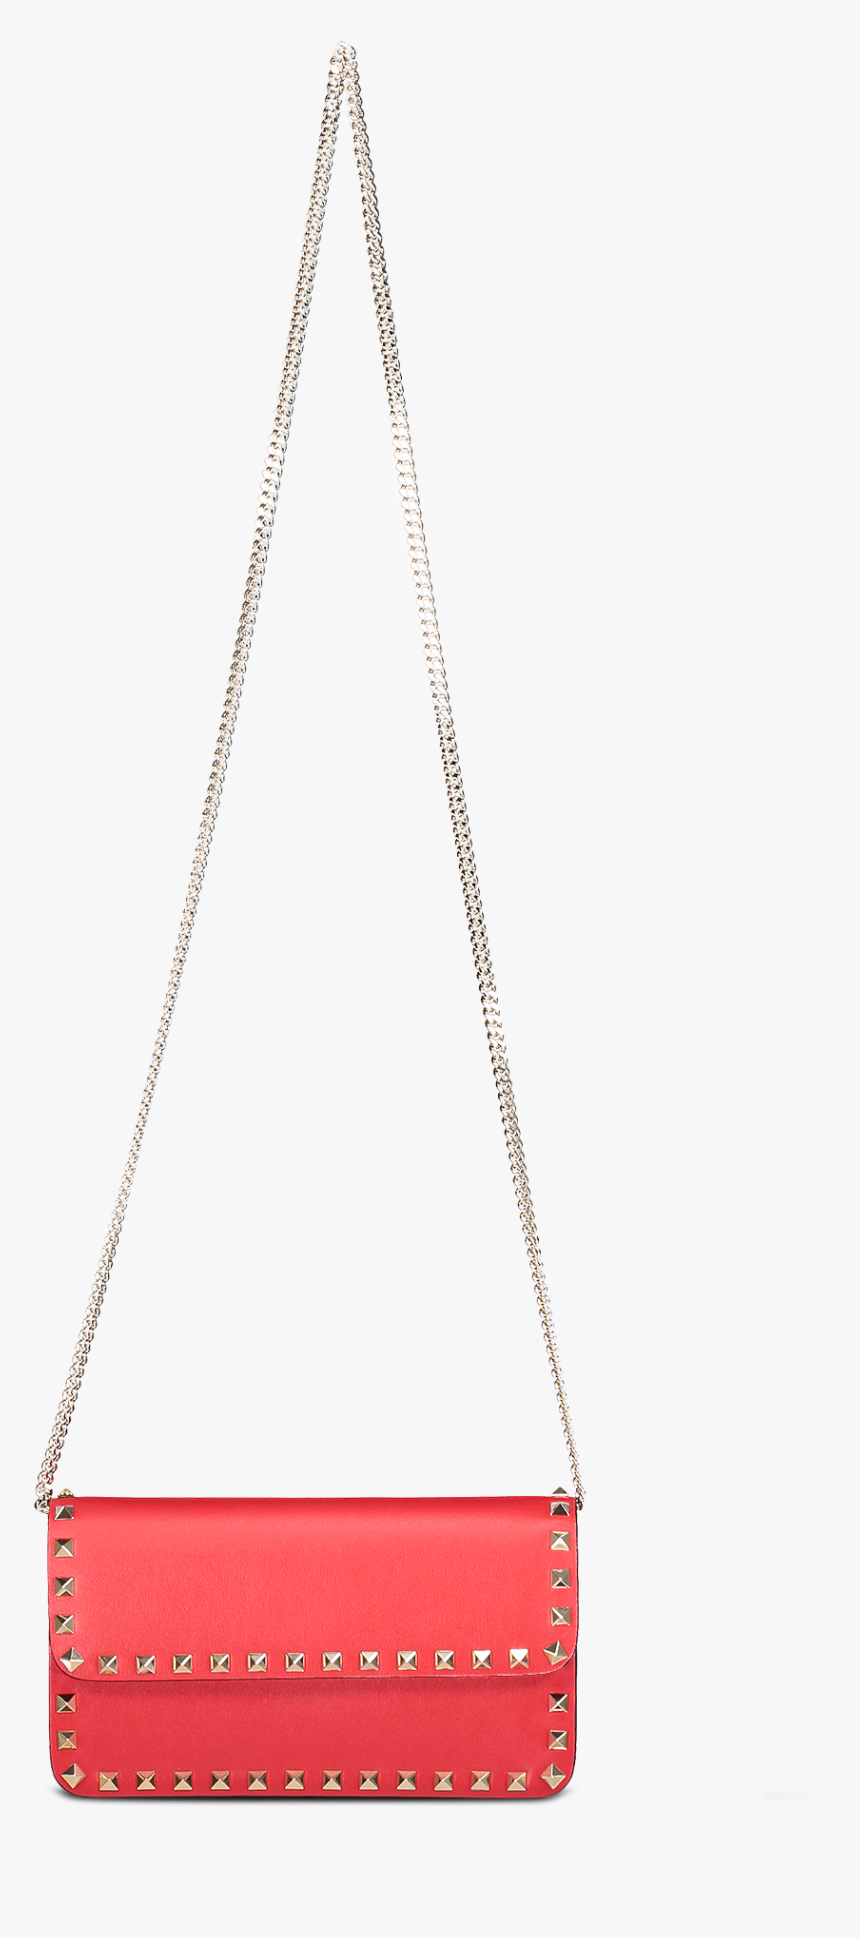 Front Hanging Image Of Valentino Women"s Rockstud Wallet - Chain, HD Png Download, Free Download